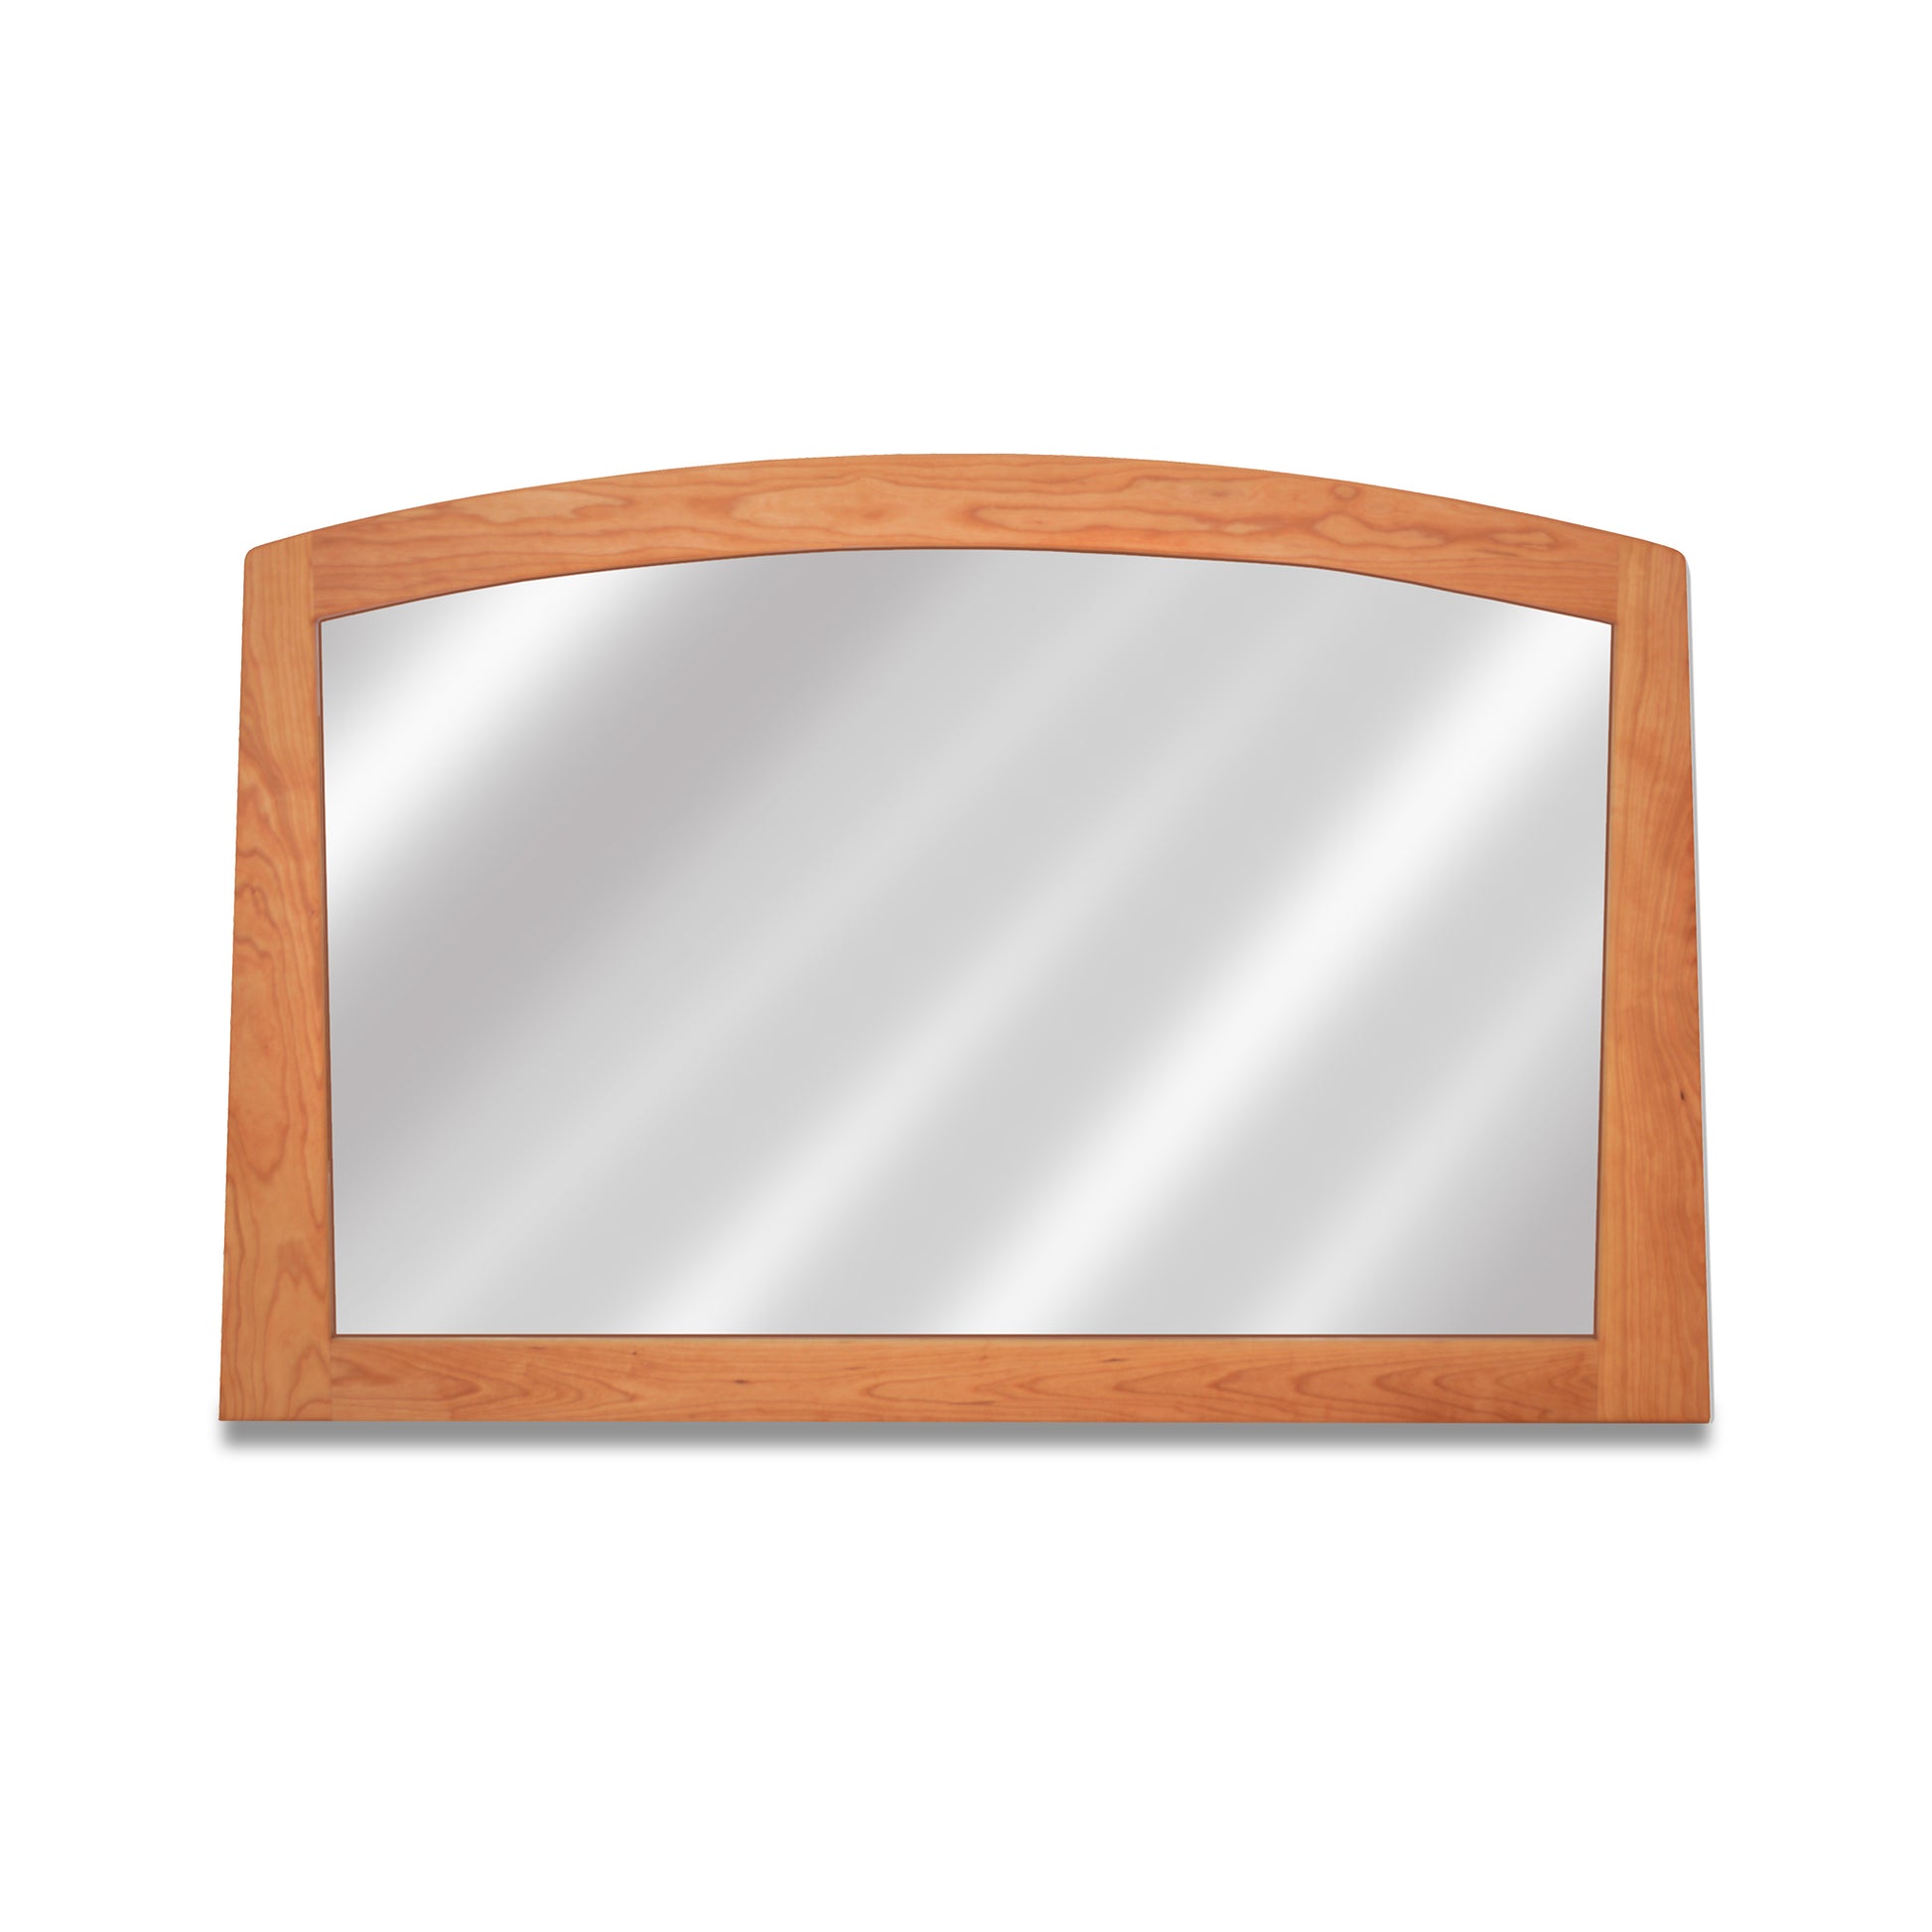 A Maple Corner Woodworks Cherry Moon Horizontal Mirror with an arched top isolated on a white background, crafted from sustainably harvested solid wood.